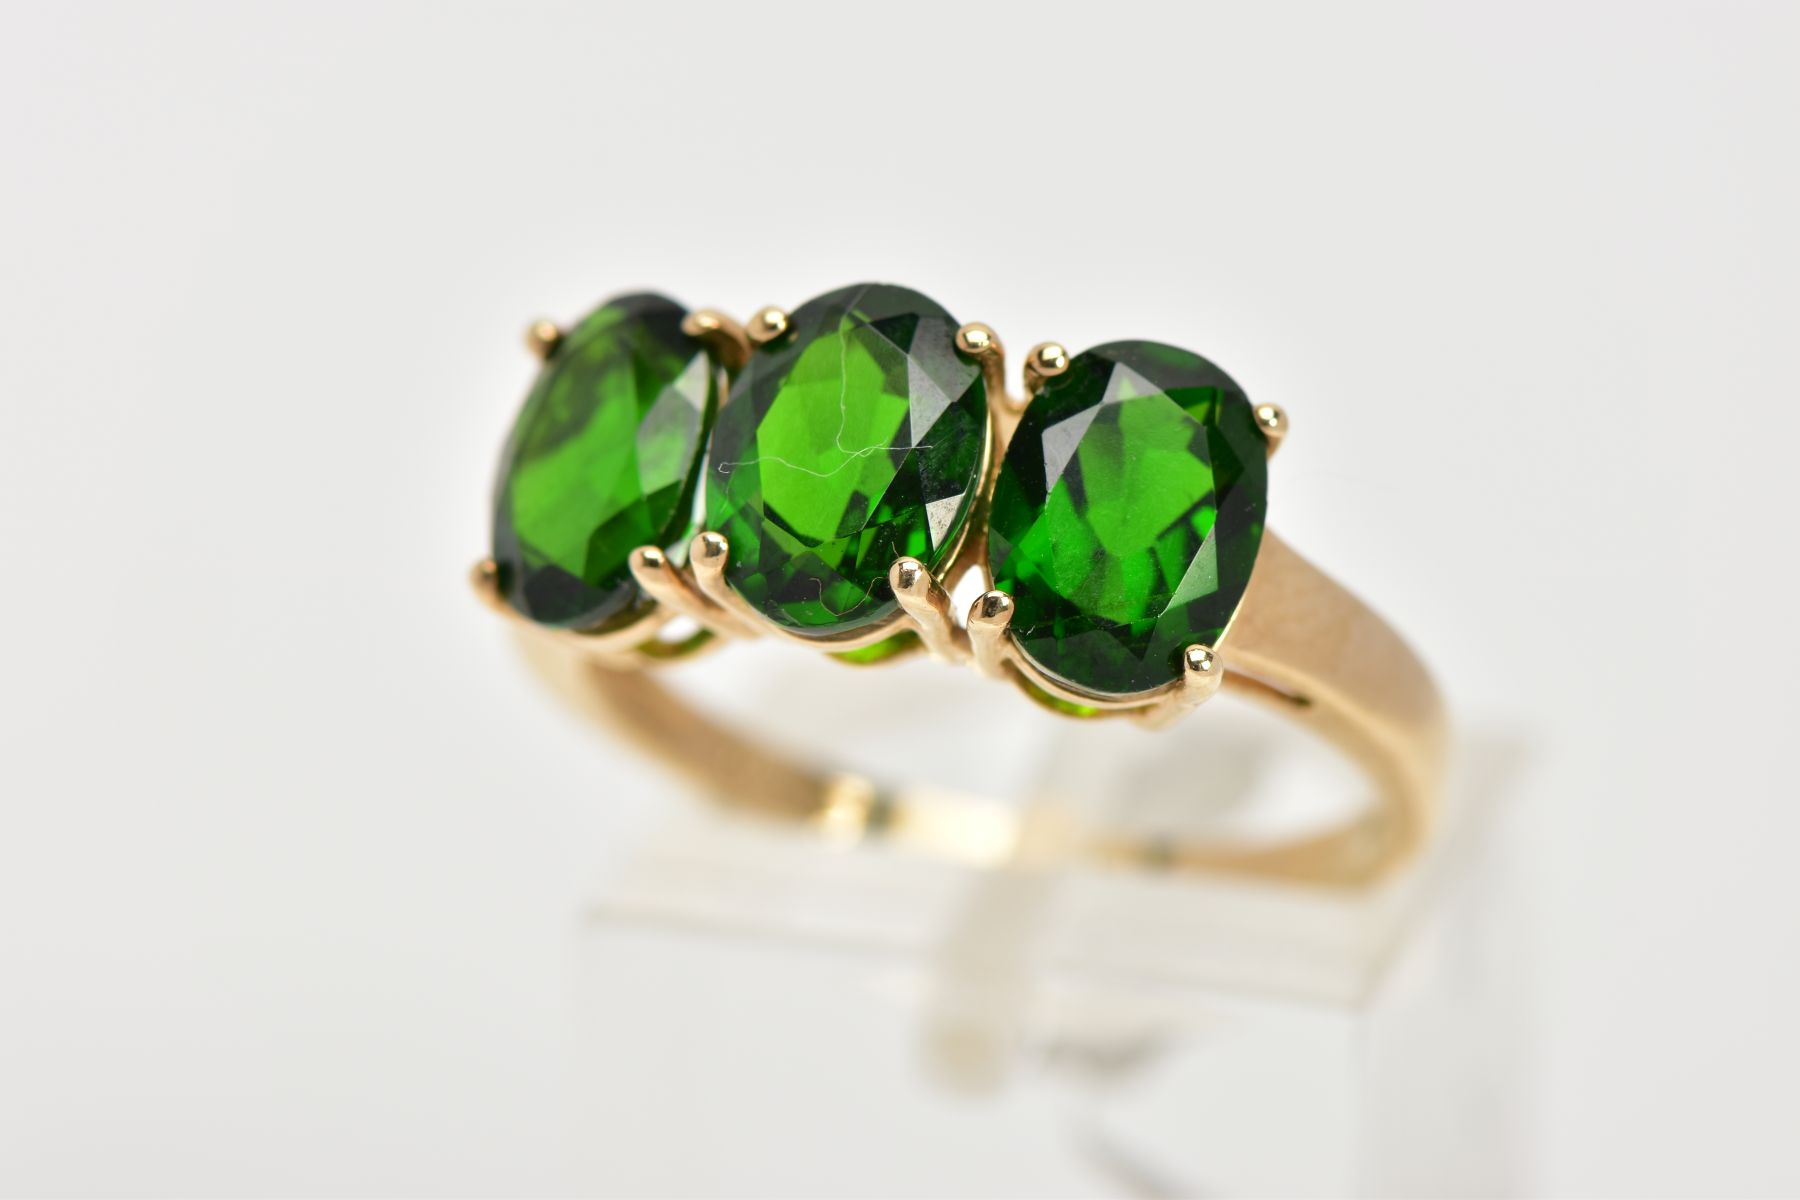 A 9CT GOLD THREE STONE TOURMALINE DRESS RING, designed with three oval cut, green stones assessed as